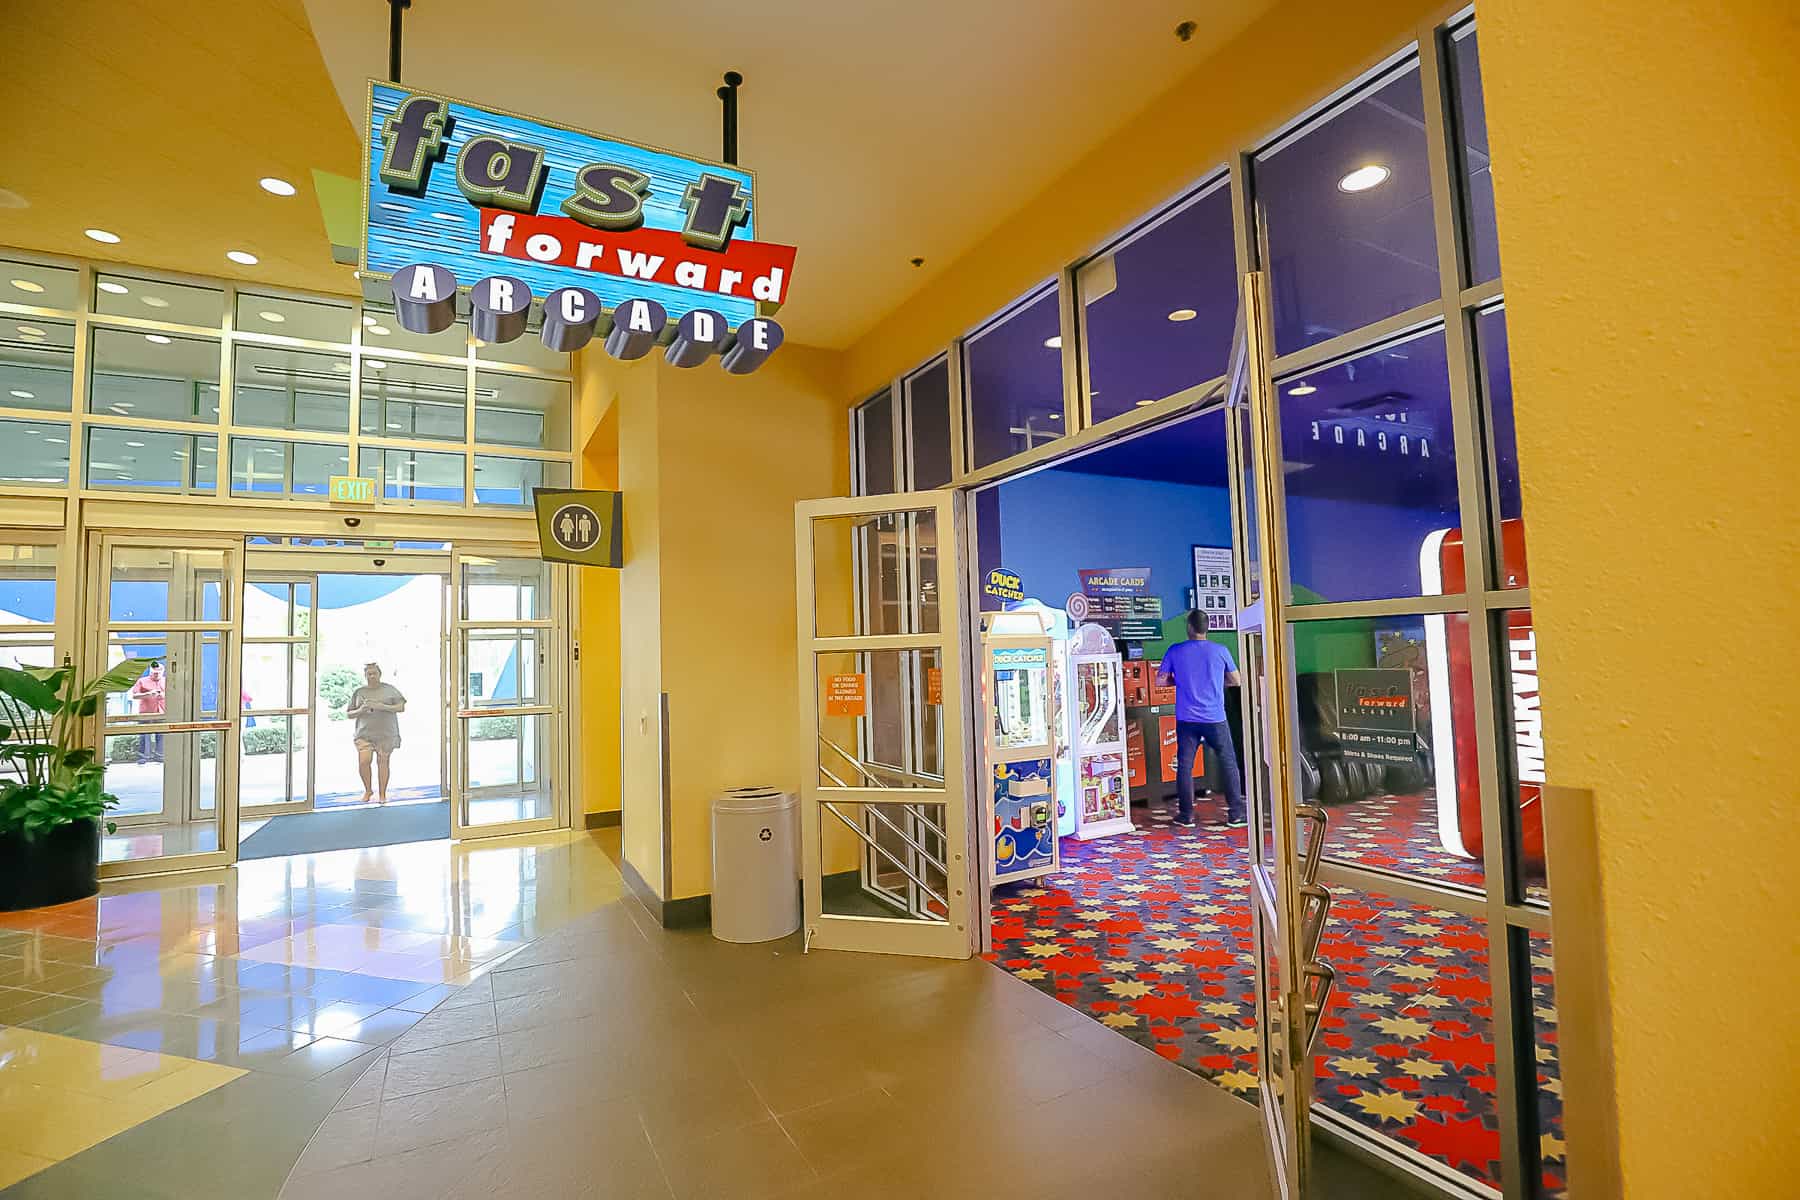 the entrance to the Fast Forward arcade 